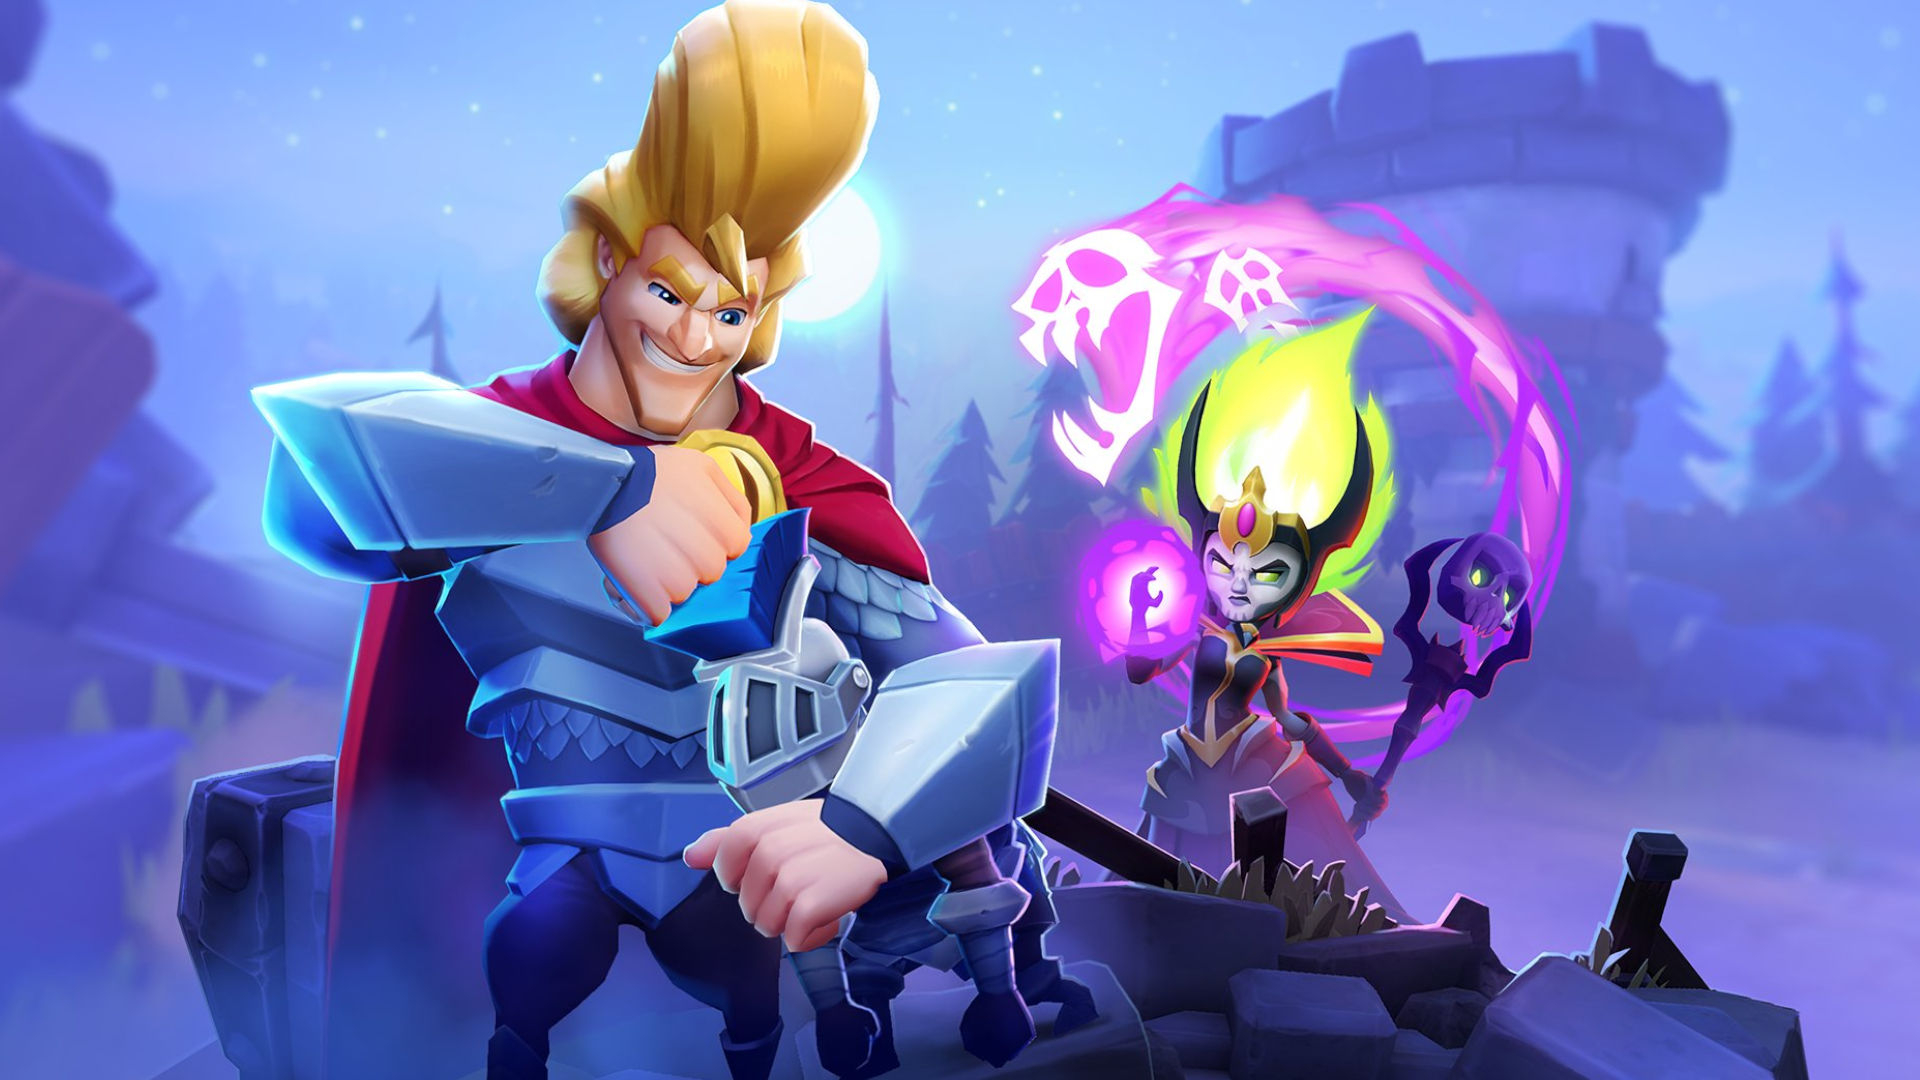 Screenshot from HEROish of a hero and a villain facing off